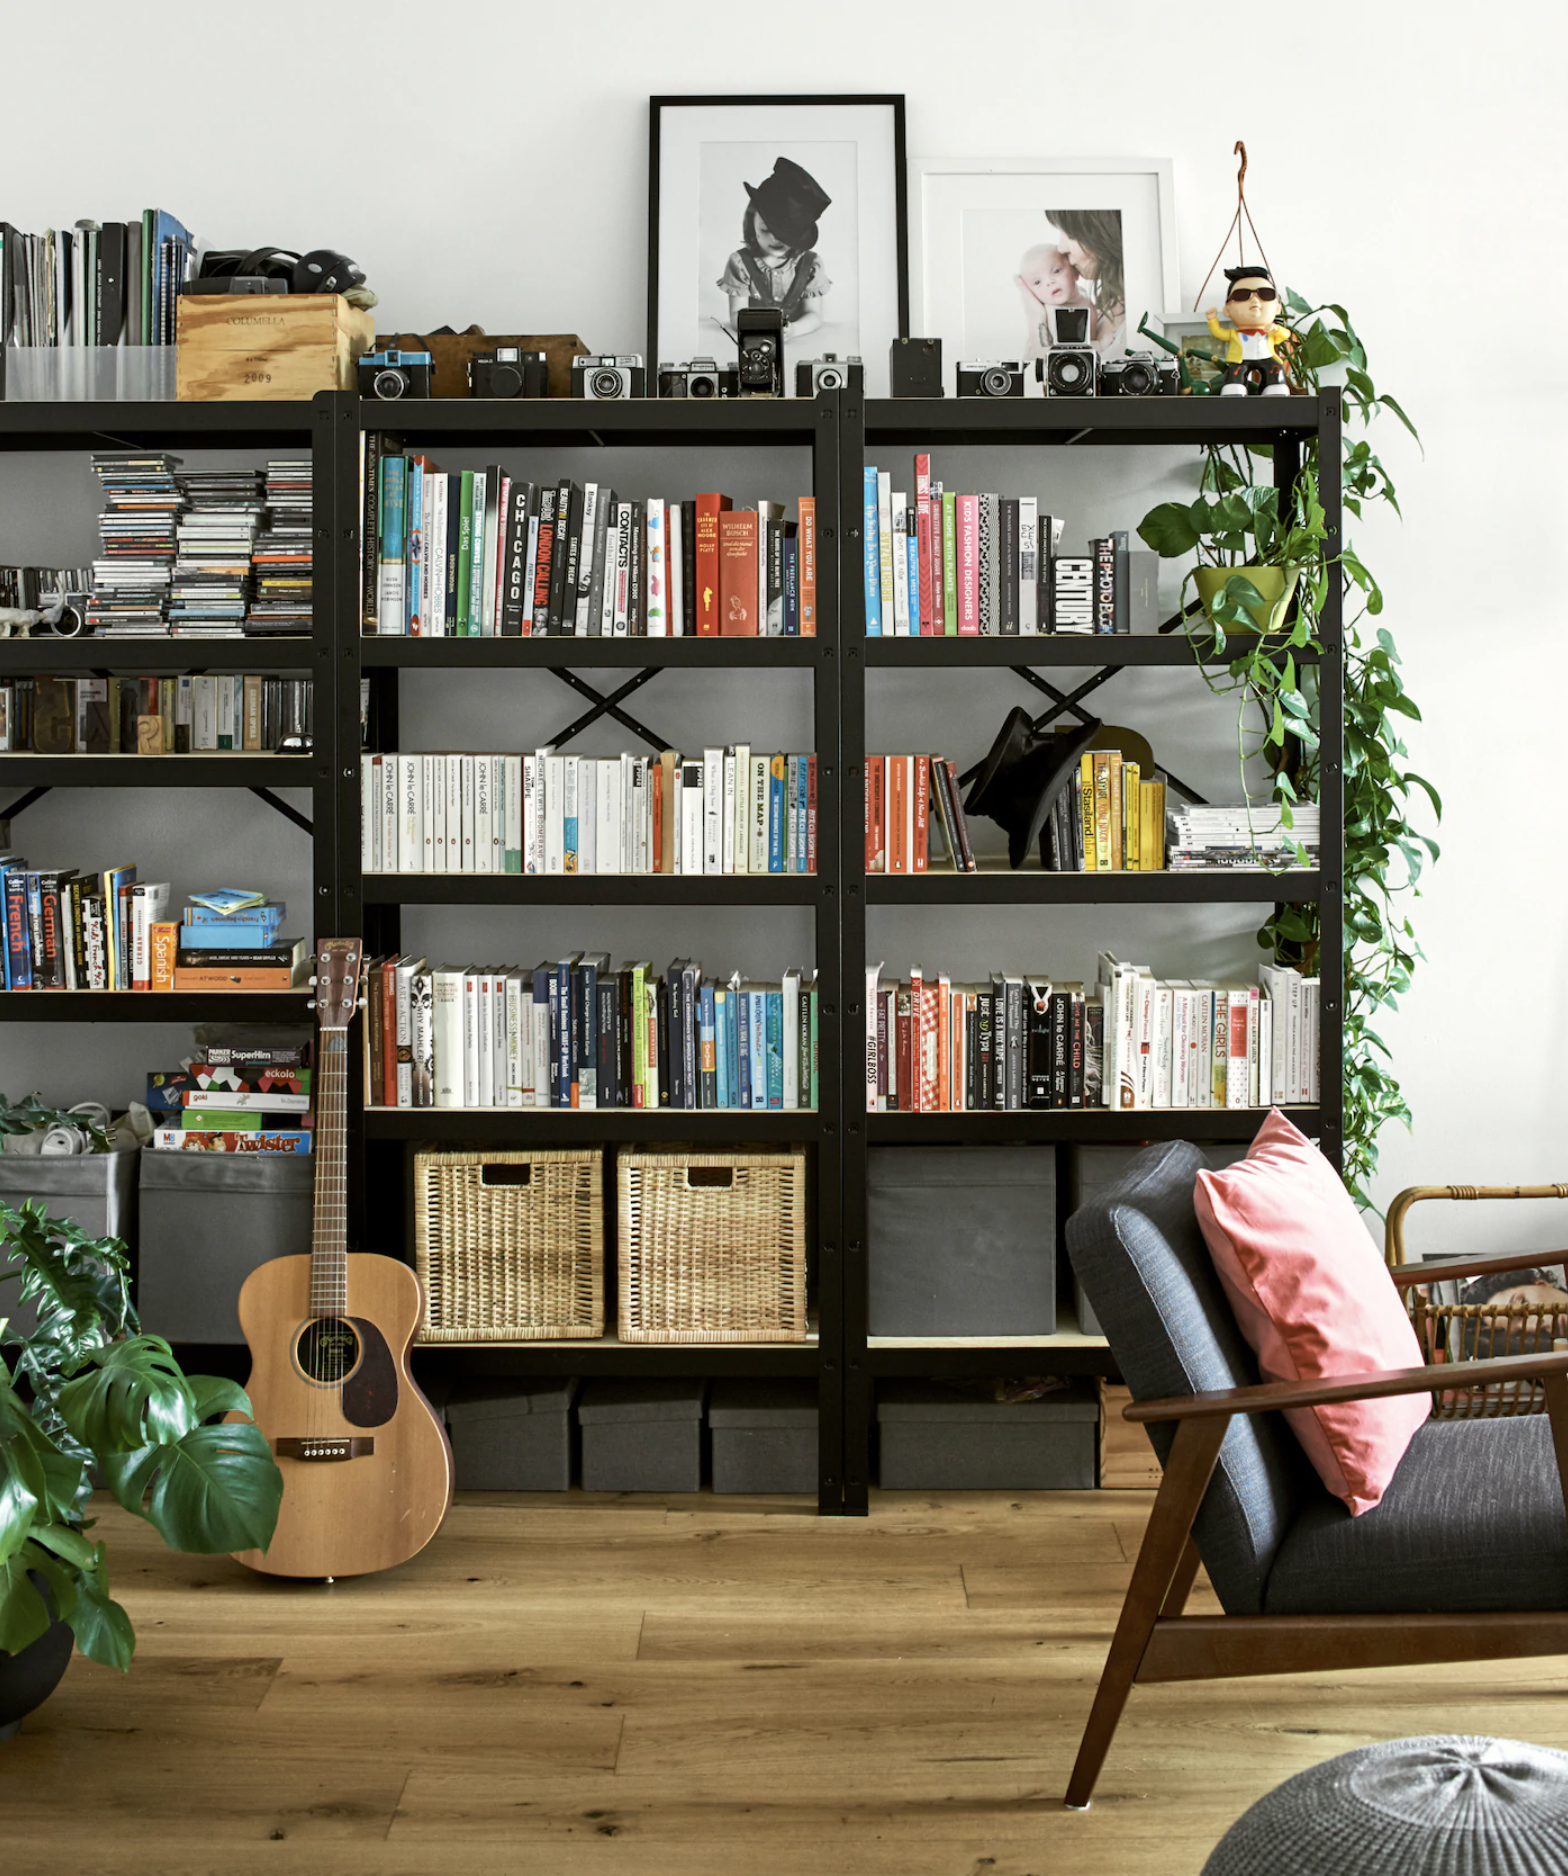 <p>                     And if you do want to go adding in some bolder colors, use books. Book storage ideas are great options if you are renting too and can't go nailing stuff to the wall or painting a bright mural. If you've got books, you've got decoration.                    </p>                                      <p>                     Dedicate an empty wall to creating your library and use some simple shelves to display your collection. Mix in some storage too with baskets and add extra interest with prints and houseplants.                   </p>